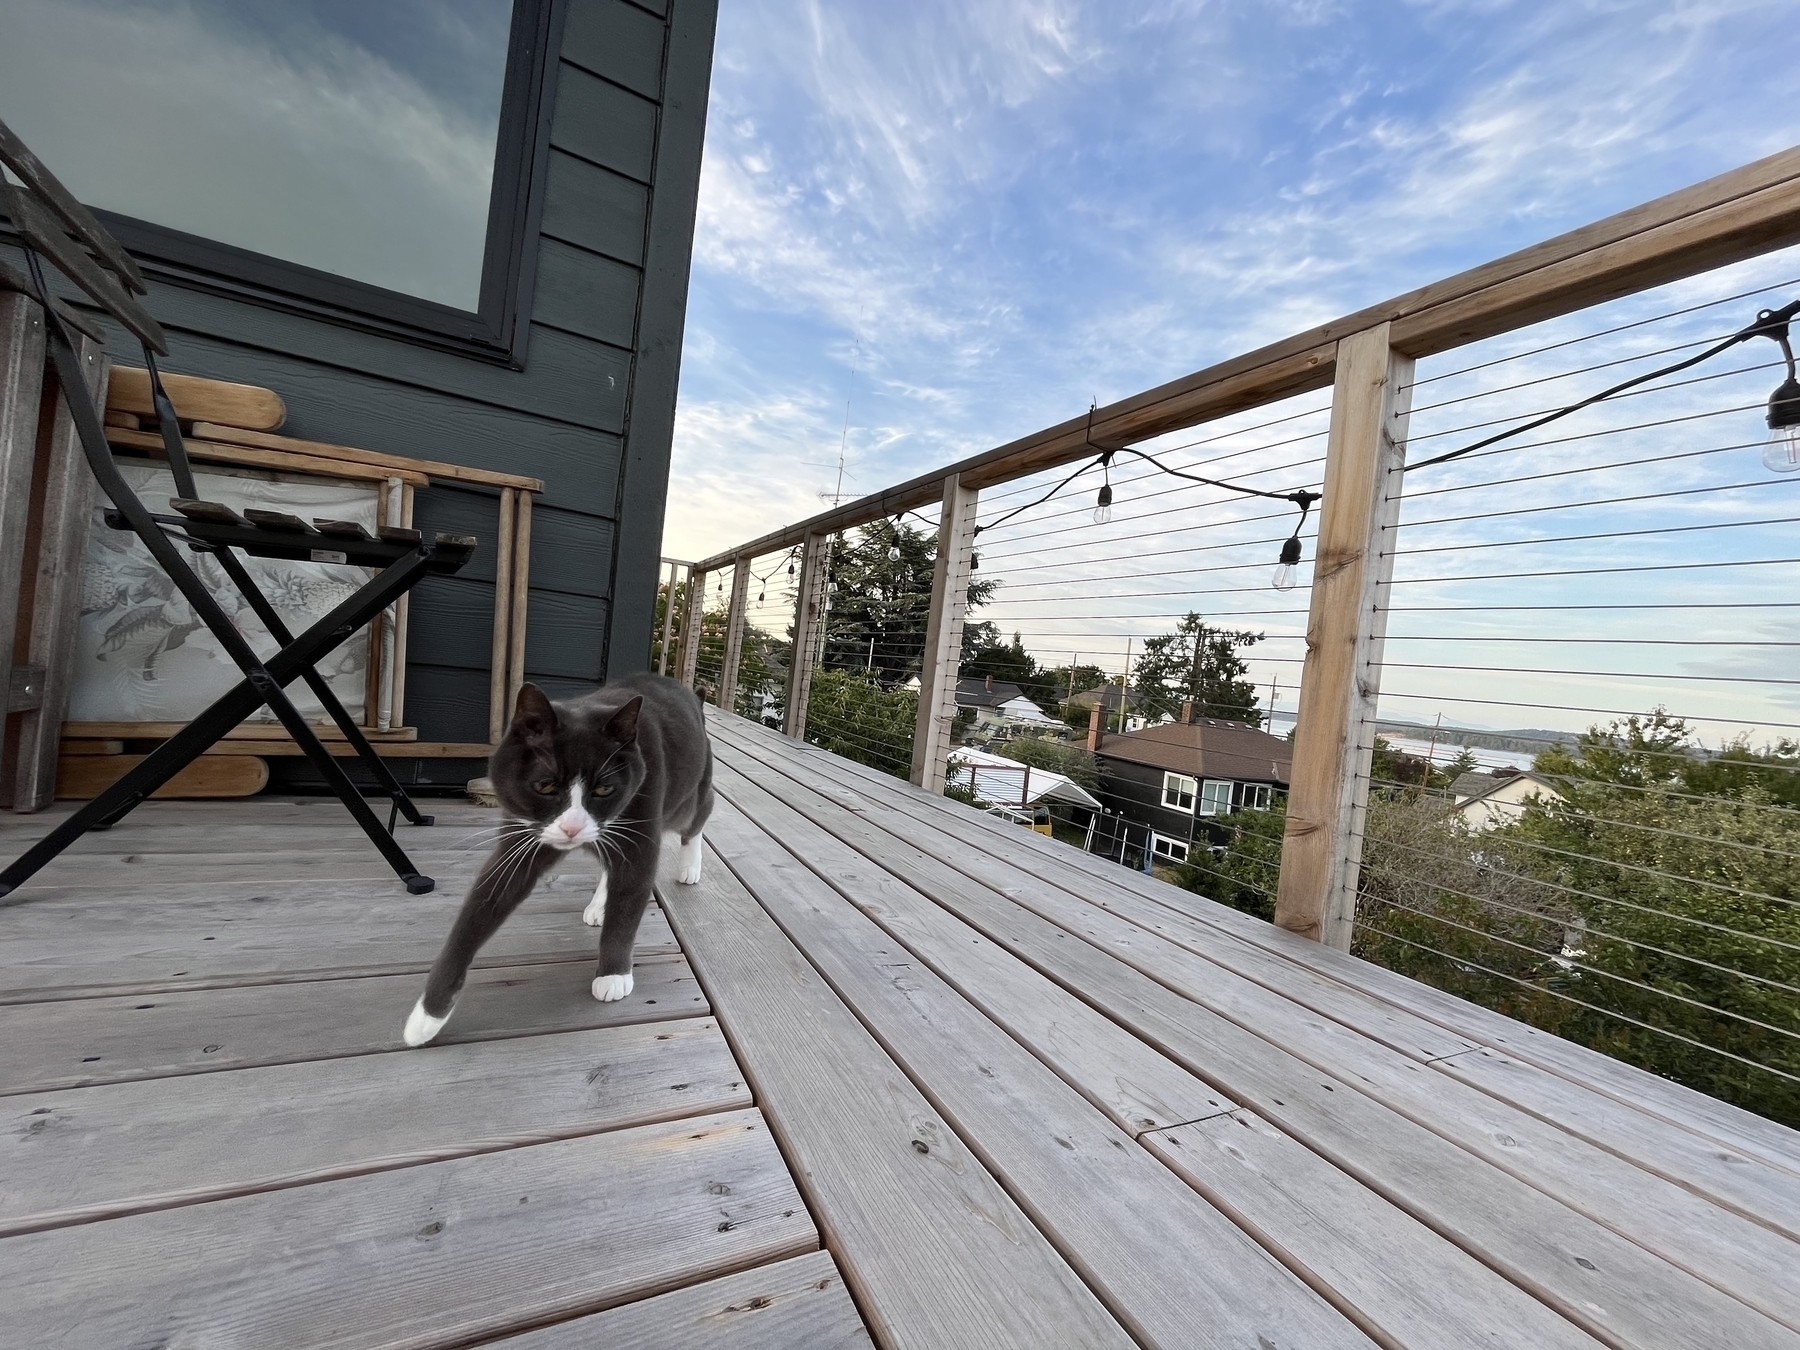 A cat sneaks by on a deck with a blue sky 